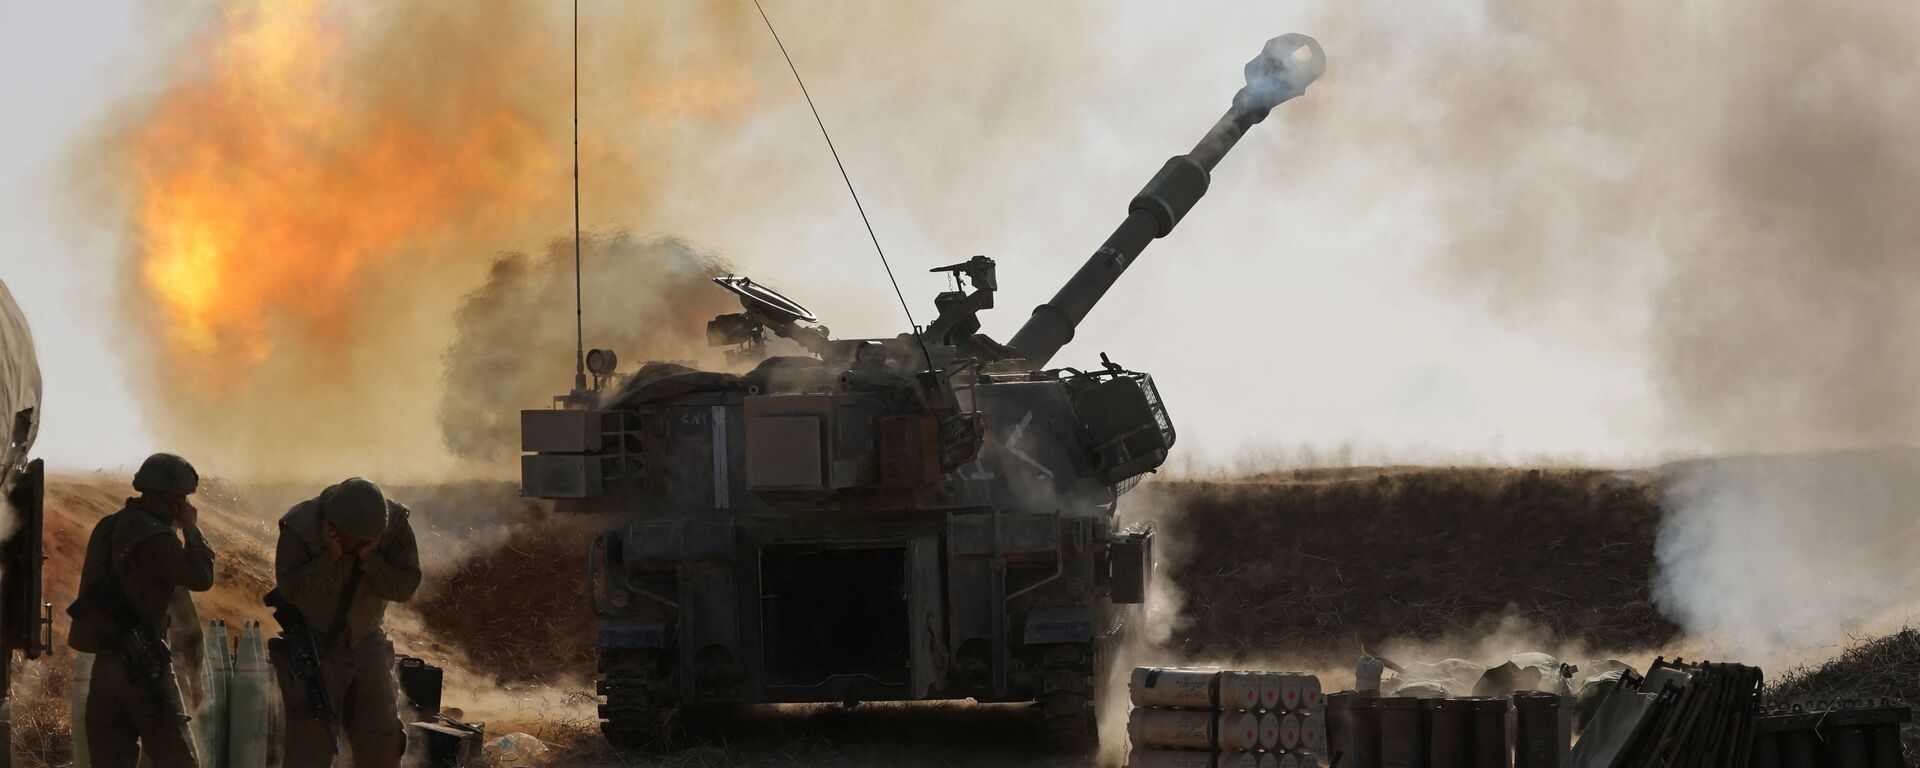 Israeli soldiers fire a 155mm self-propelled howitzer towards targets in the Gaza Strip from their position near the southern Israeli city of Sderot on May 12, 2021. - Israel's Defence Minister Benny Gantz vowed more attacks on Hamas and other Palestinian militant groups in Gaza to bring total, long-term quiet before considering a ceasefire. - Sputnik International, 1920, 04.12.2023